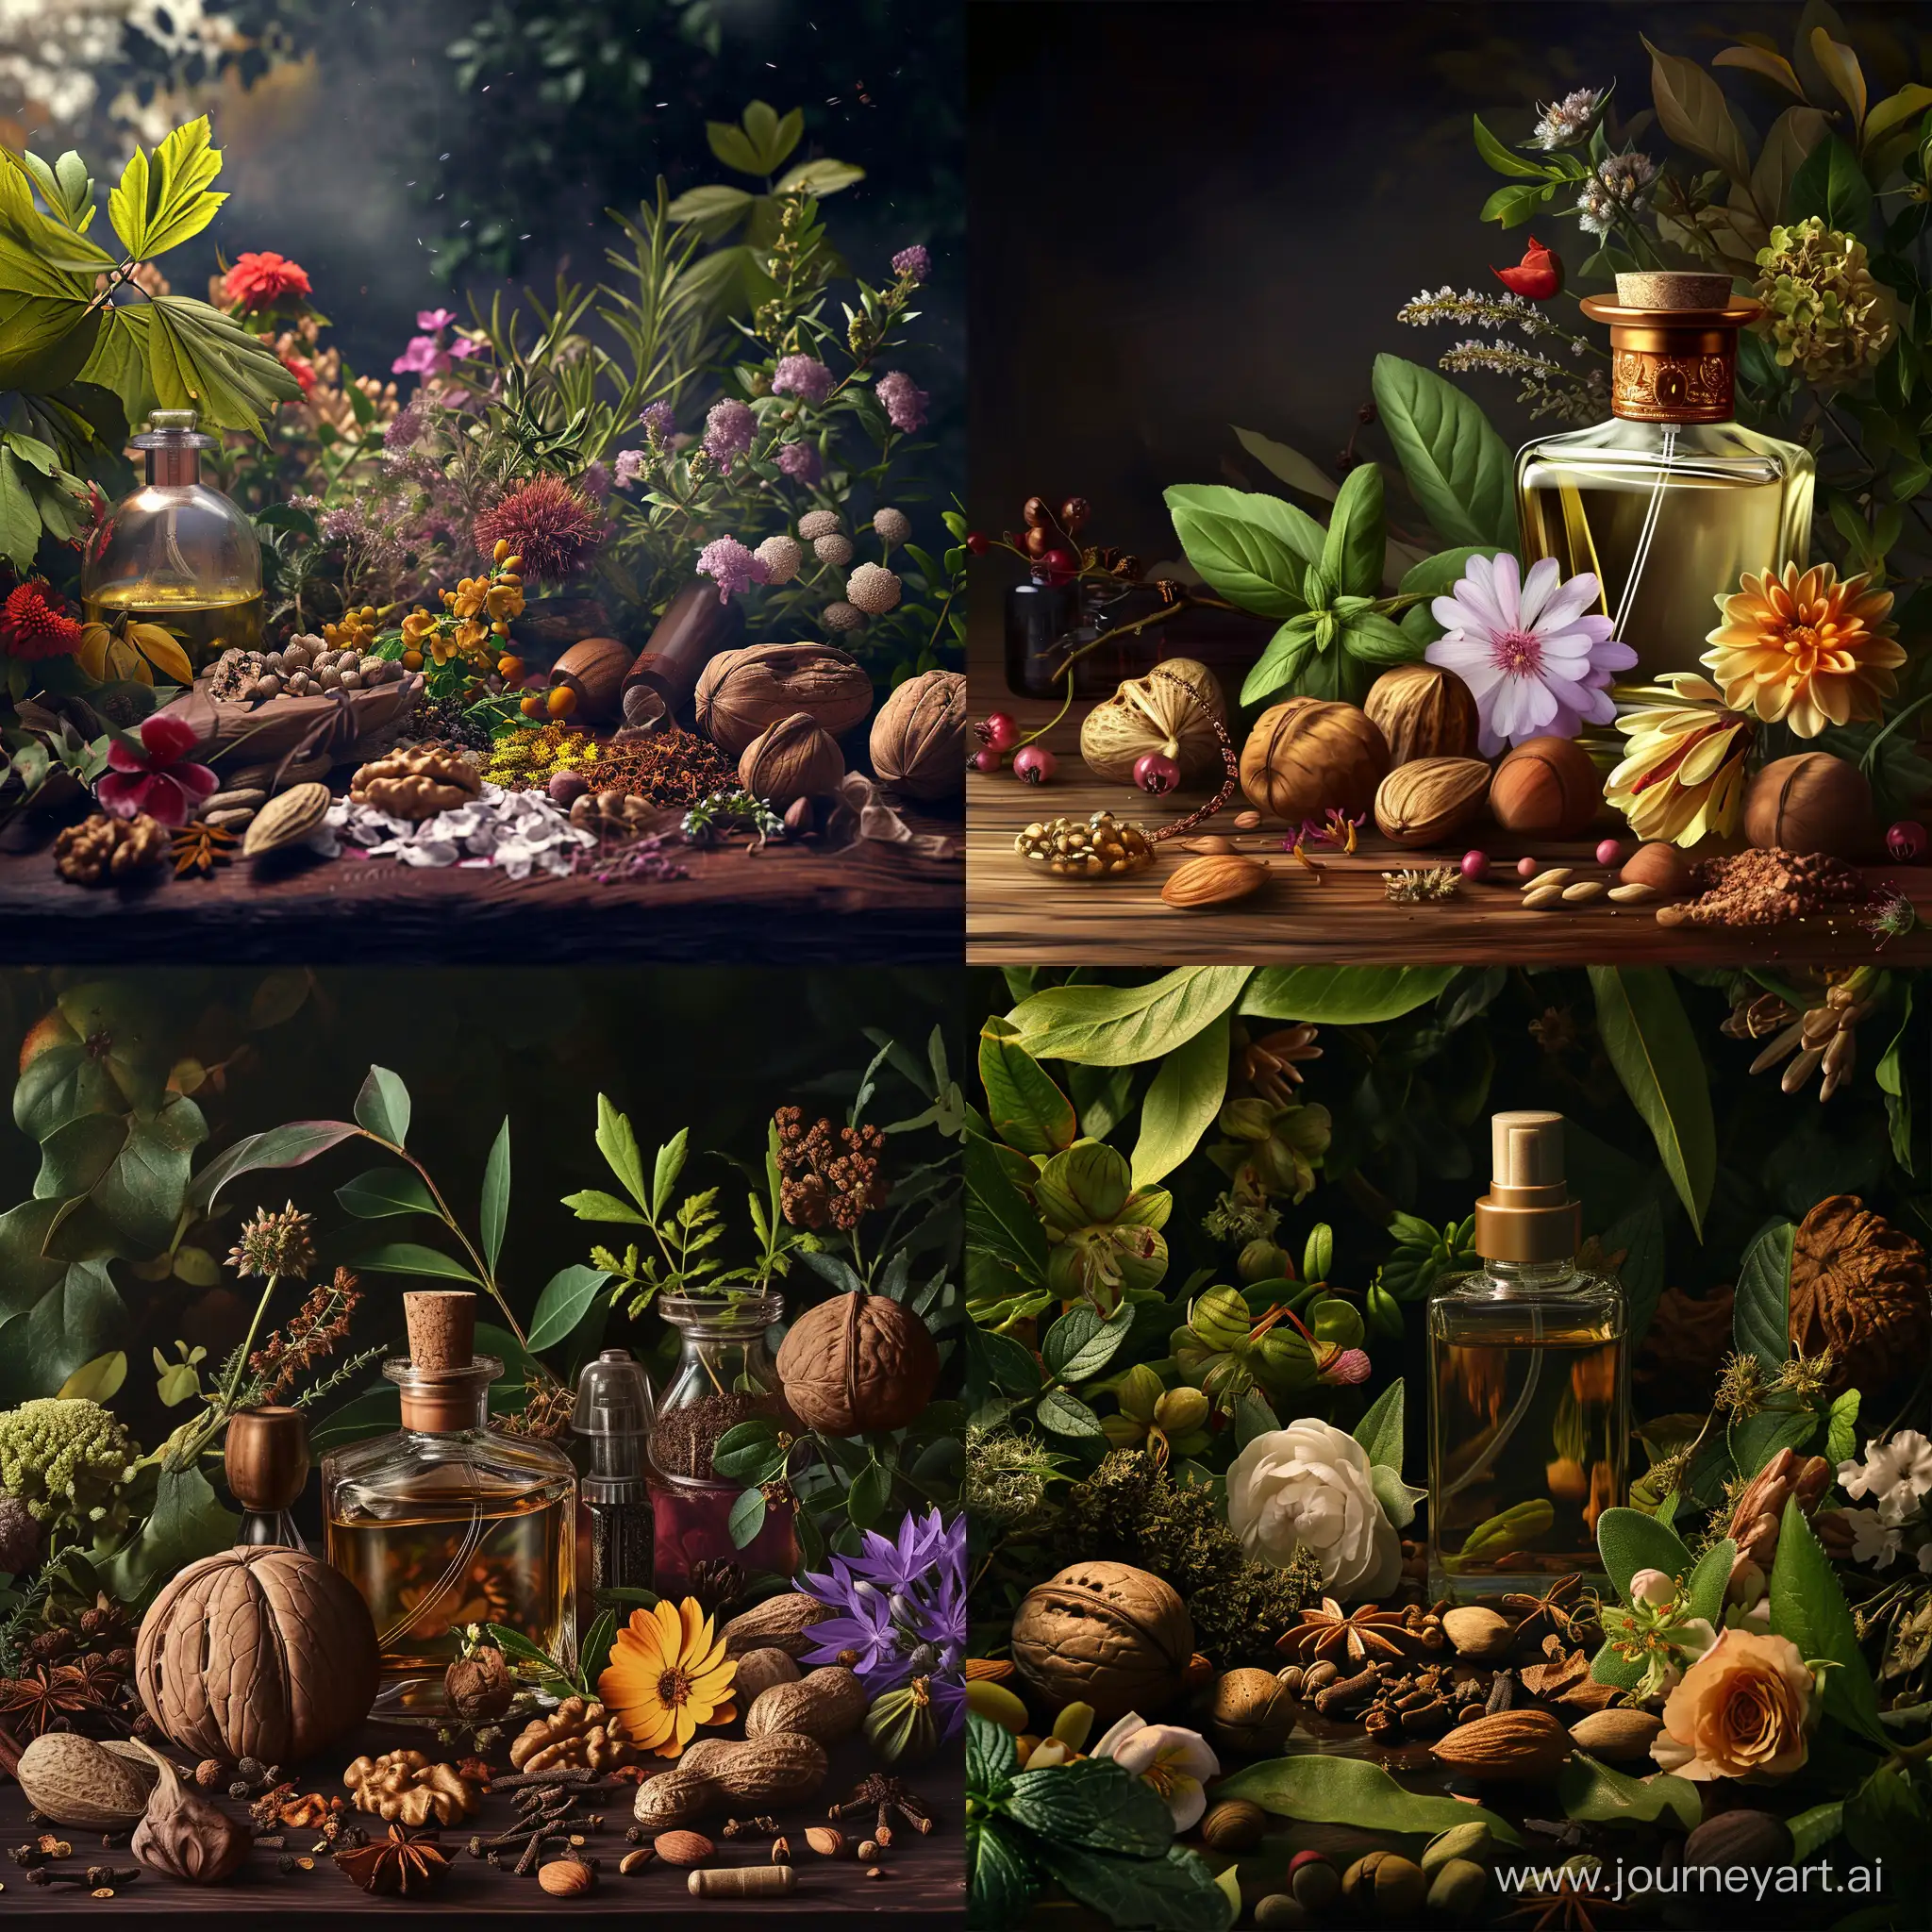 Exquisite-Perfumes-and-Medicinal-Herbs-Amidst-Rare-Flowers-and-Nuts-on-a-Mysterious-Dark-Background